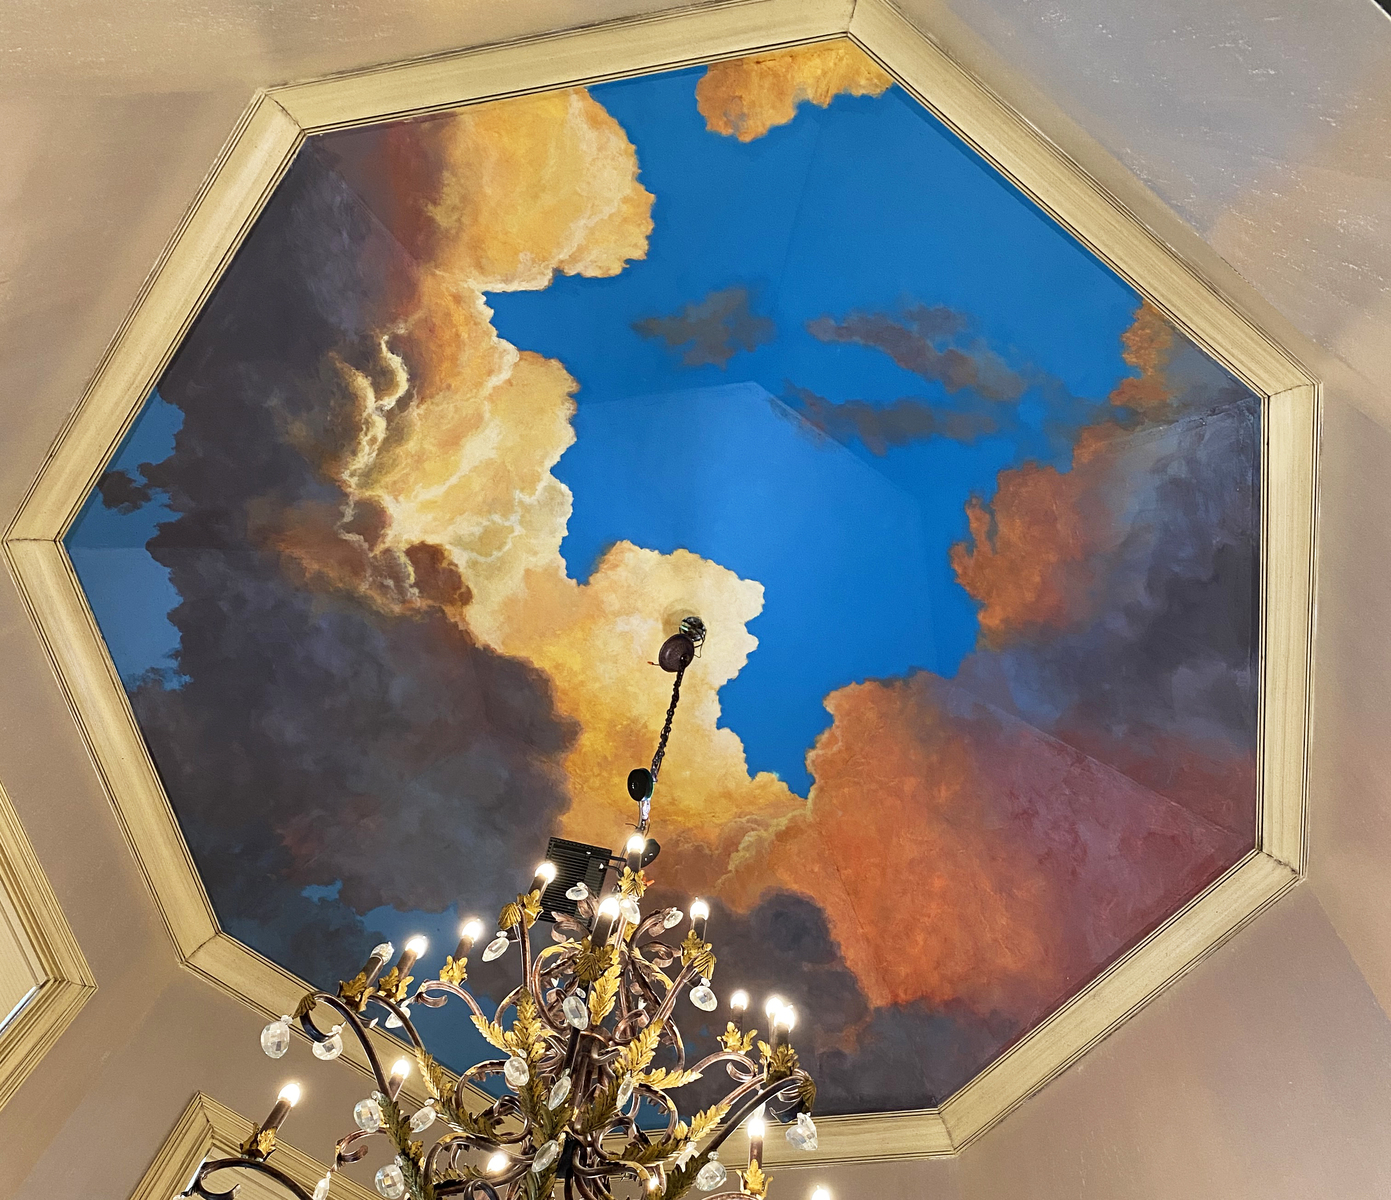 Twilight master bedroom day and night sky sky mural